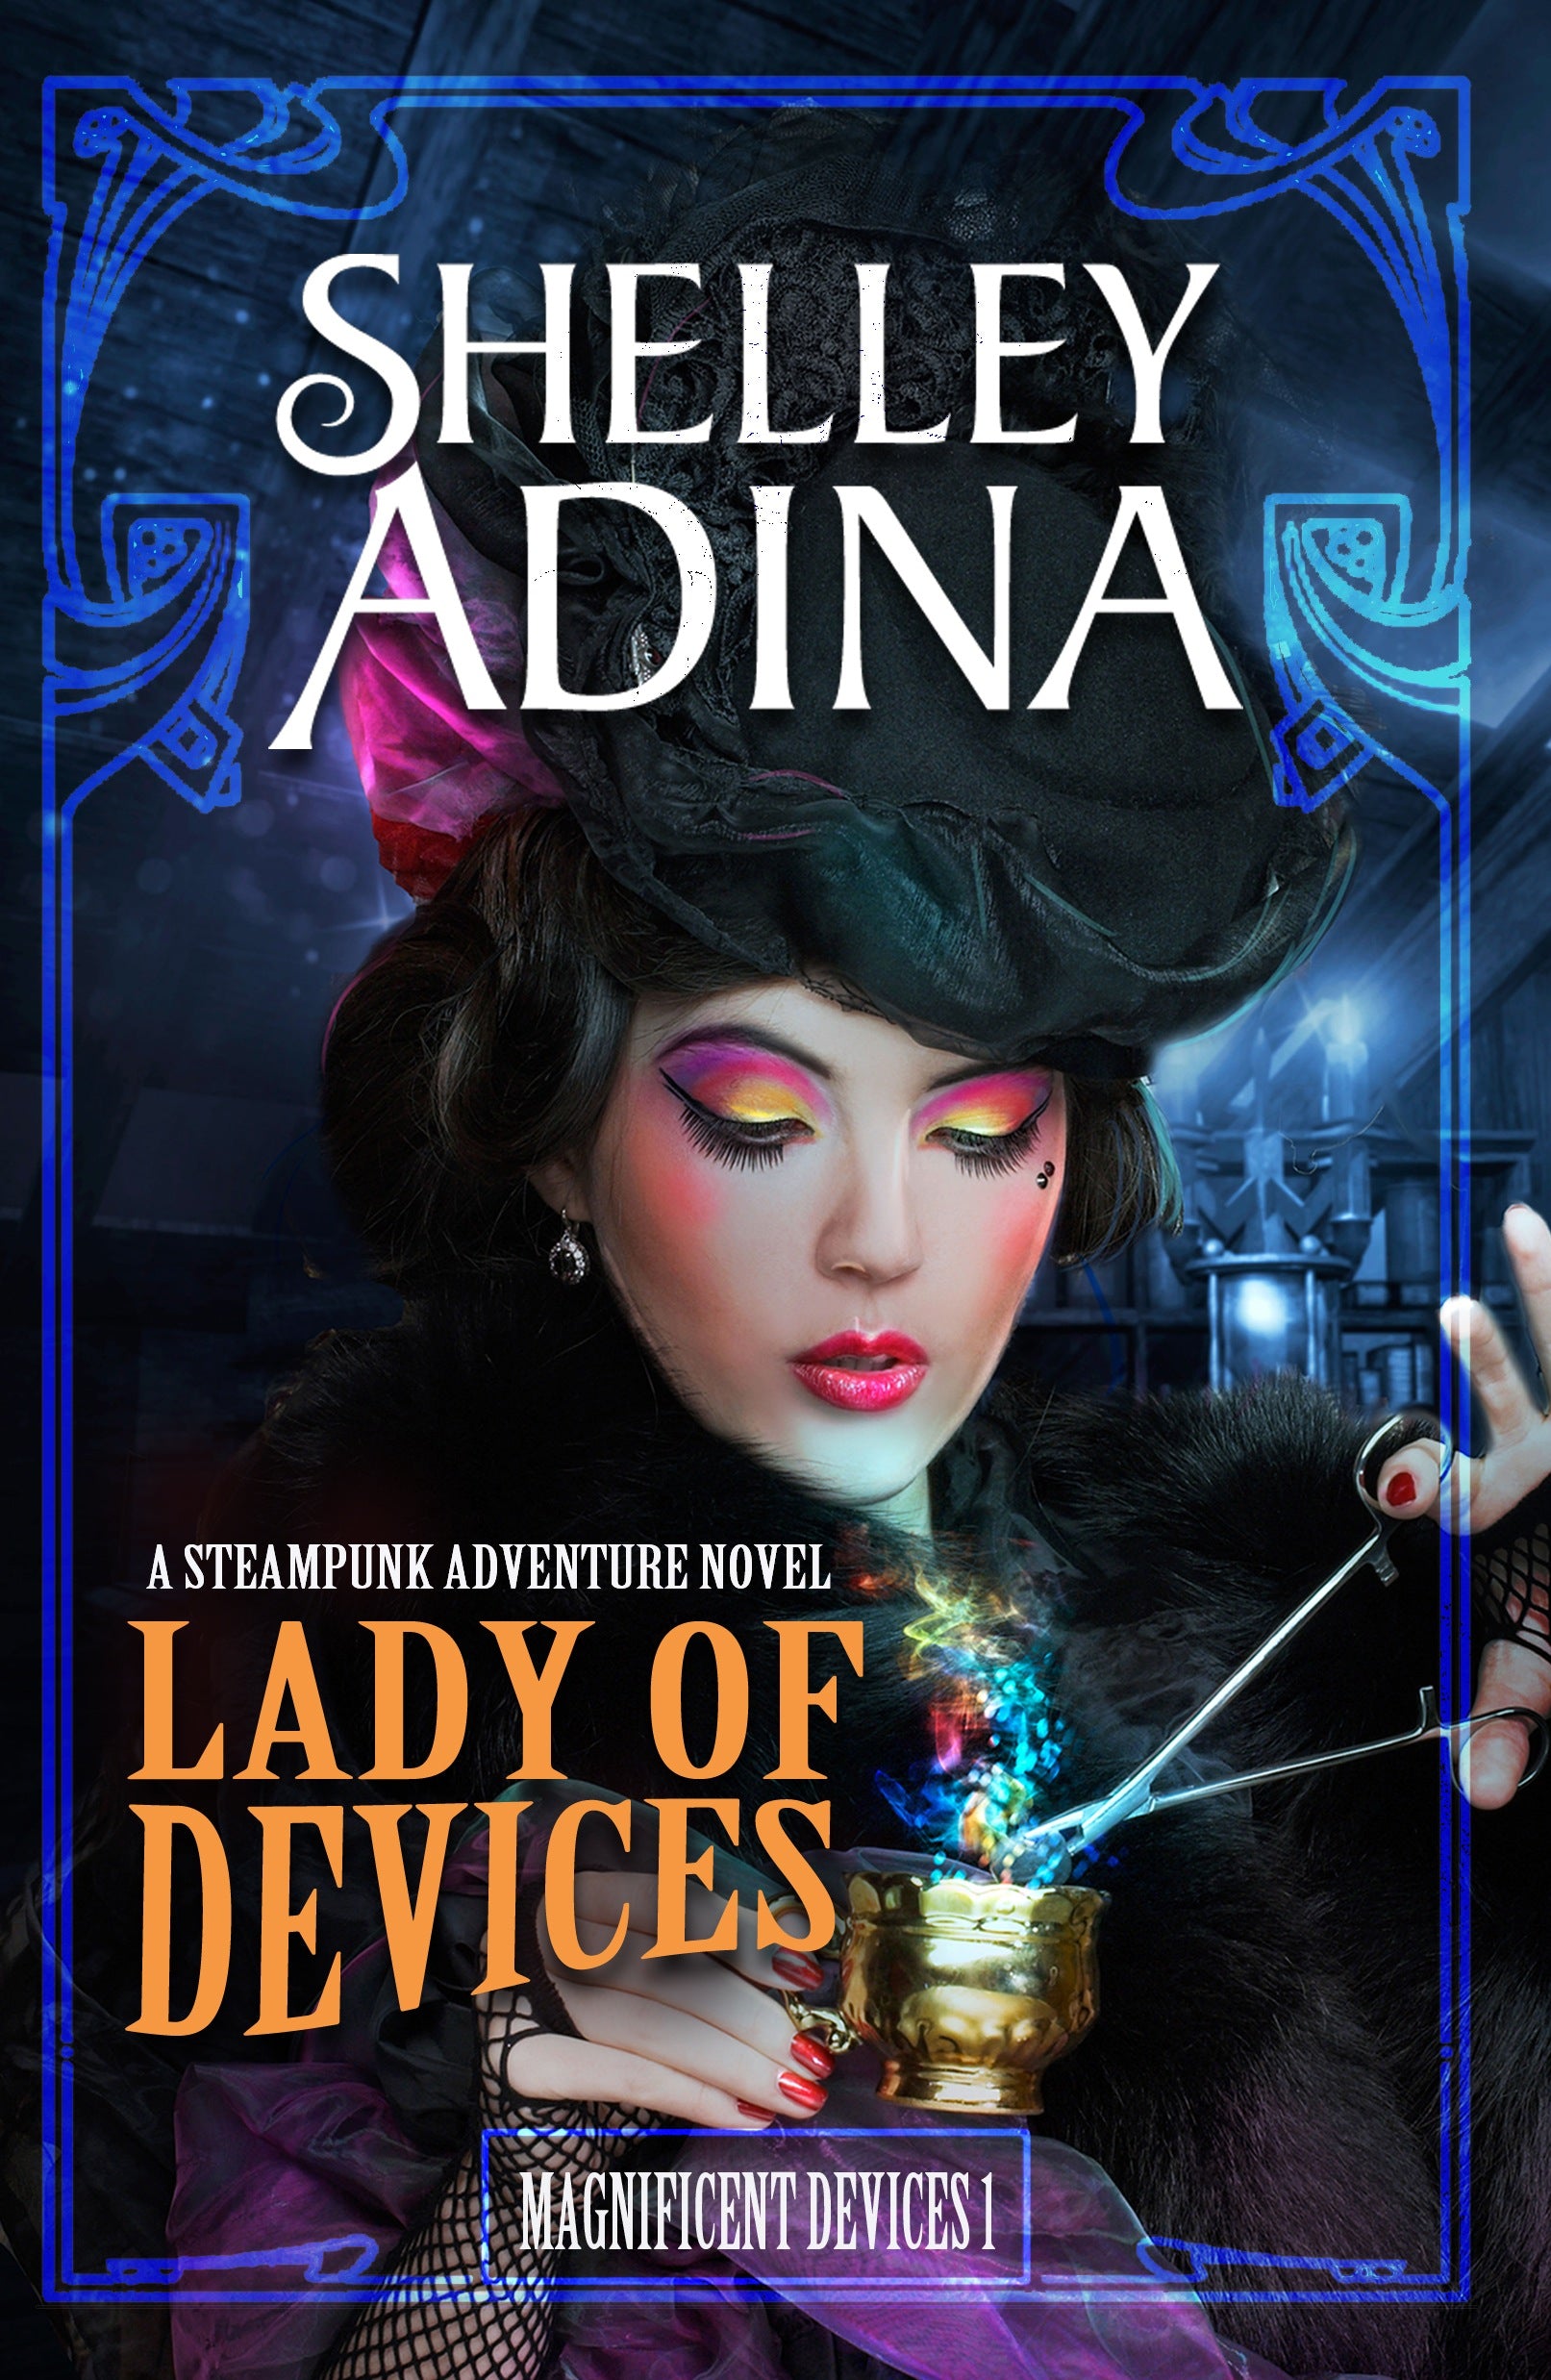 Lady of Devices written by Shelley Adina